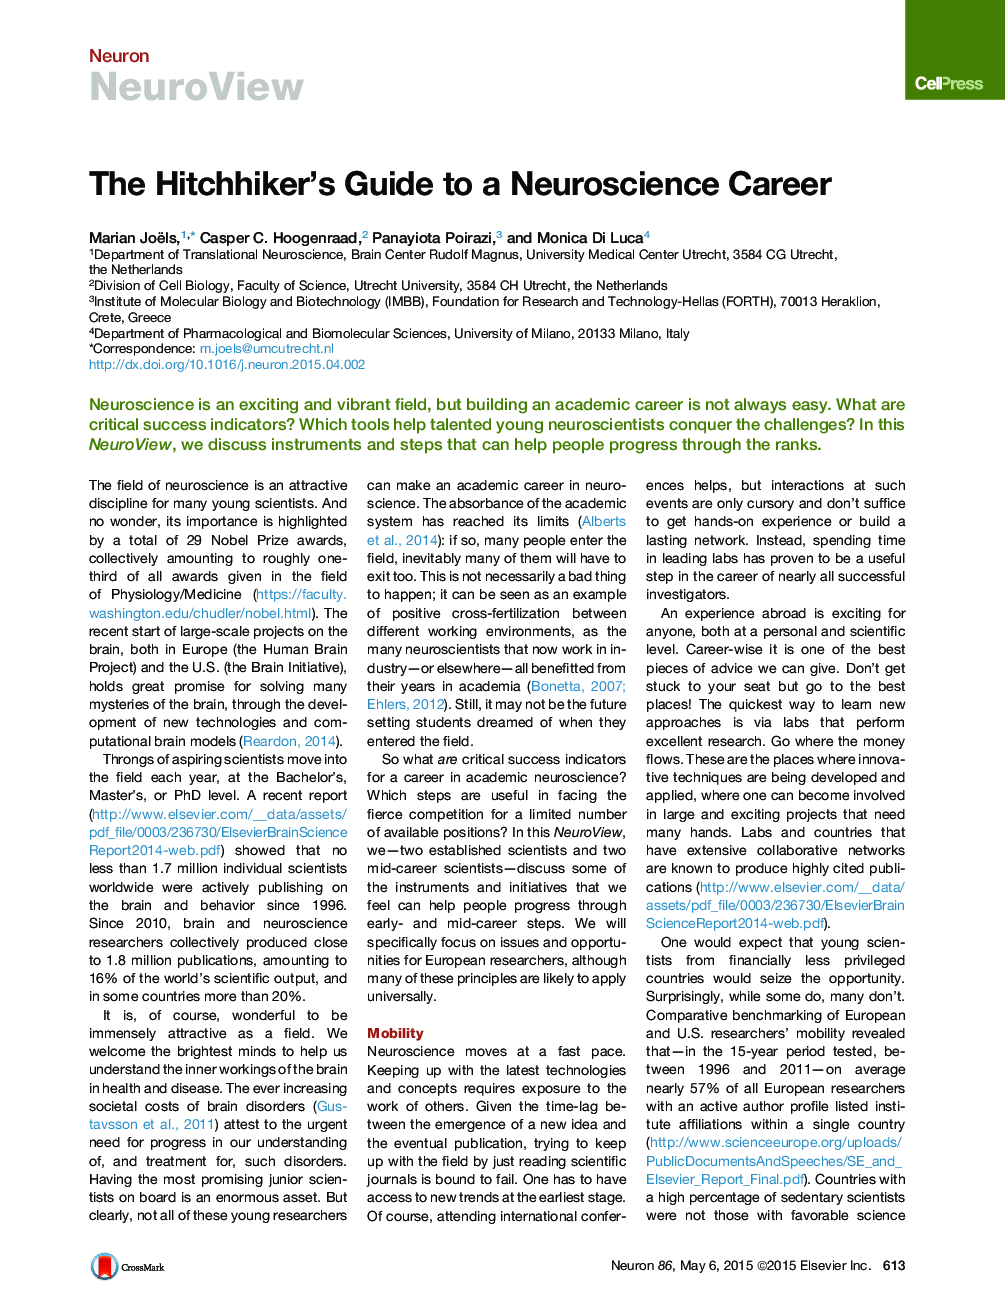 The Hitchhiker’s Guide to a Neuroscience Career